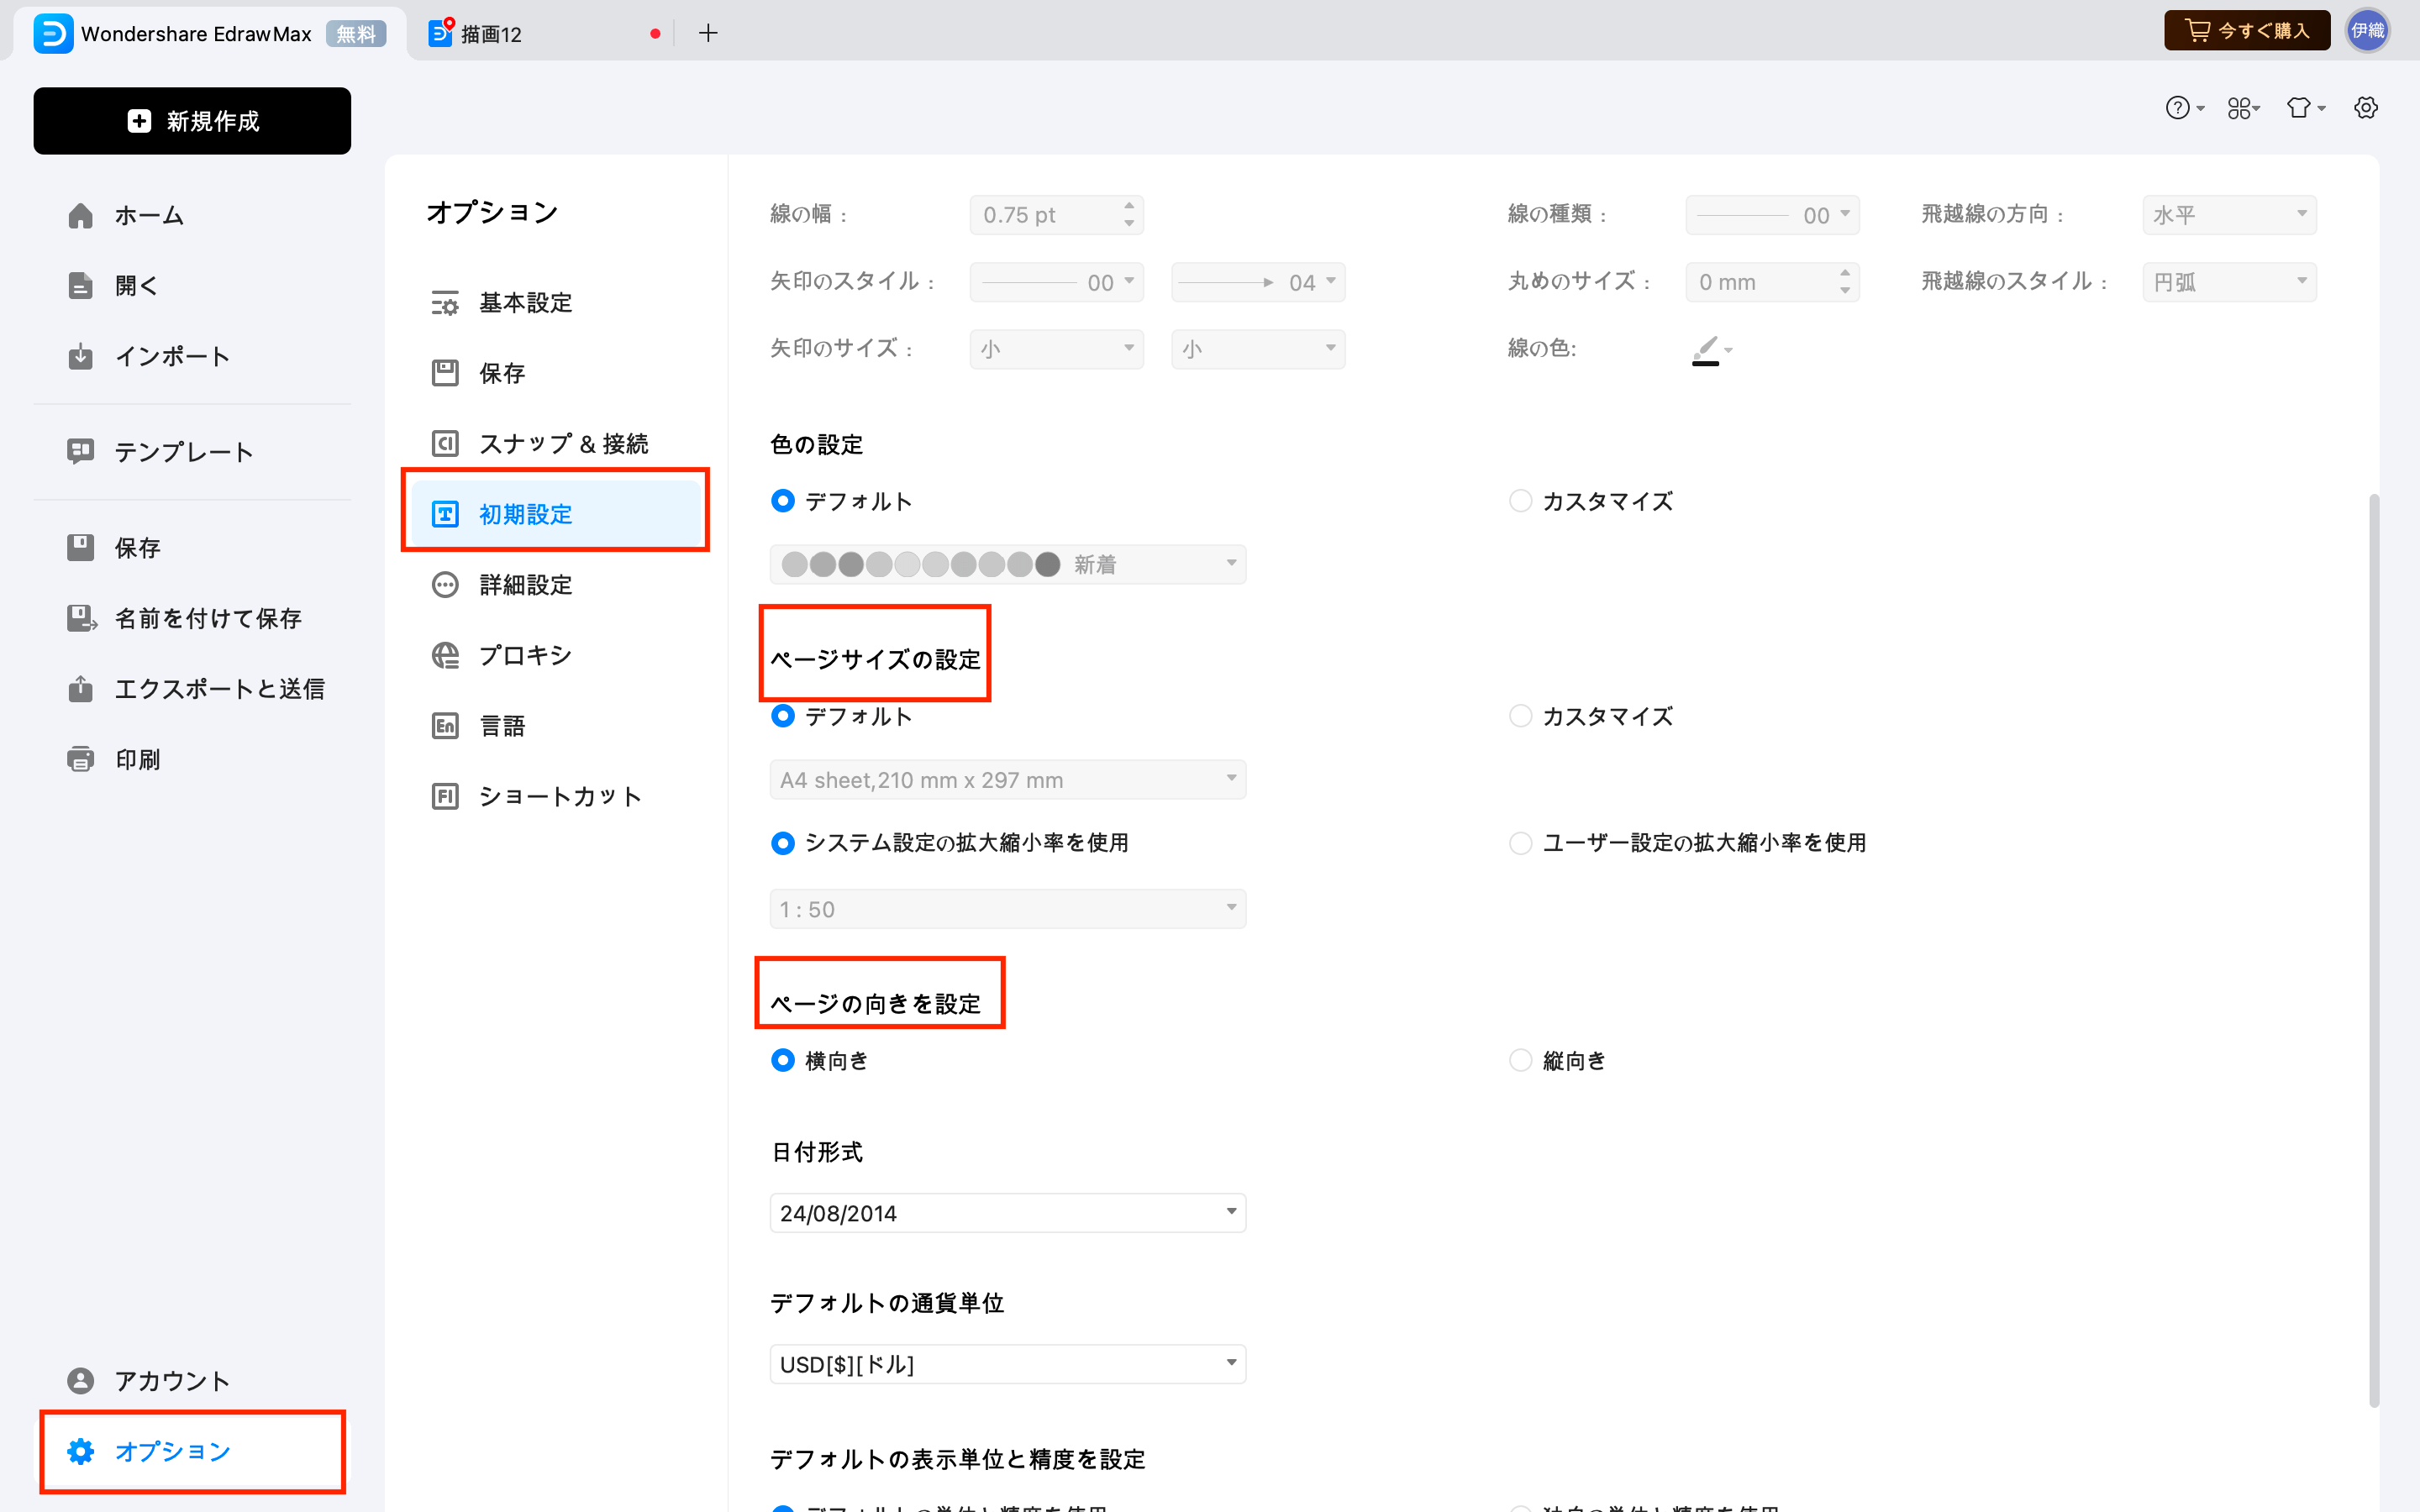 edrawmax default page size settings